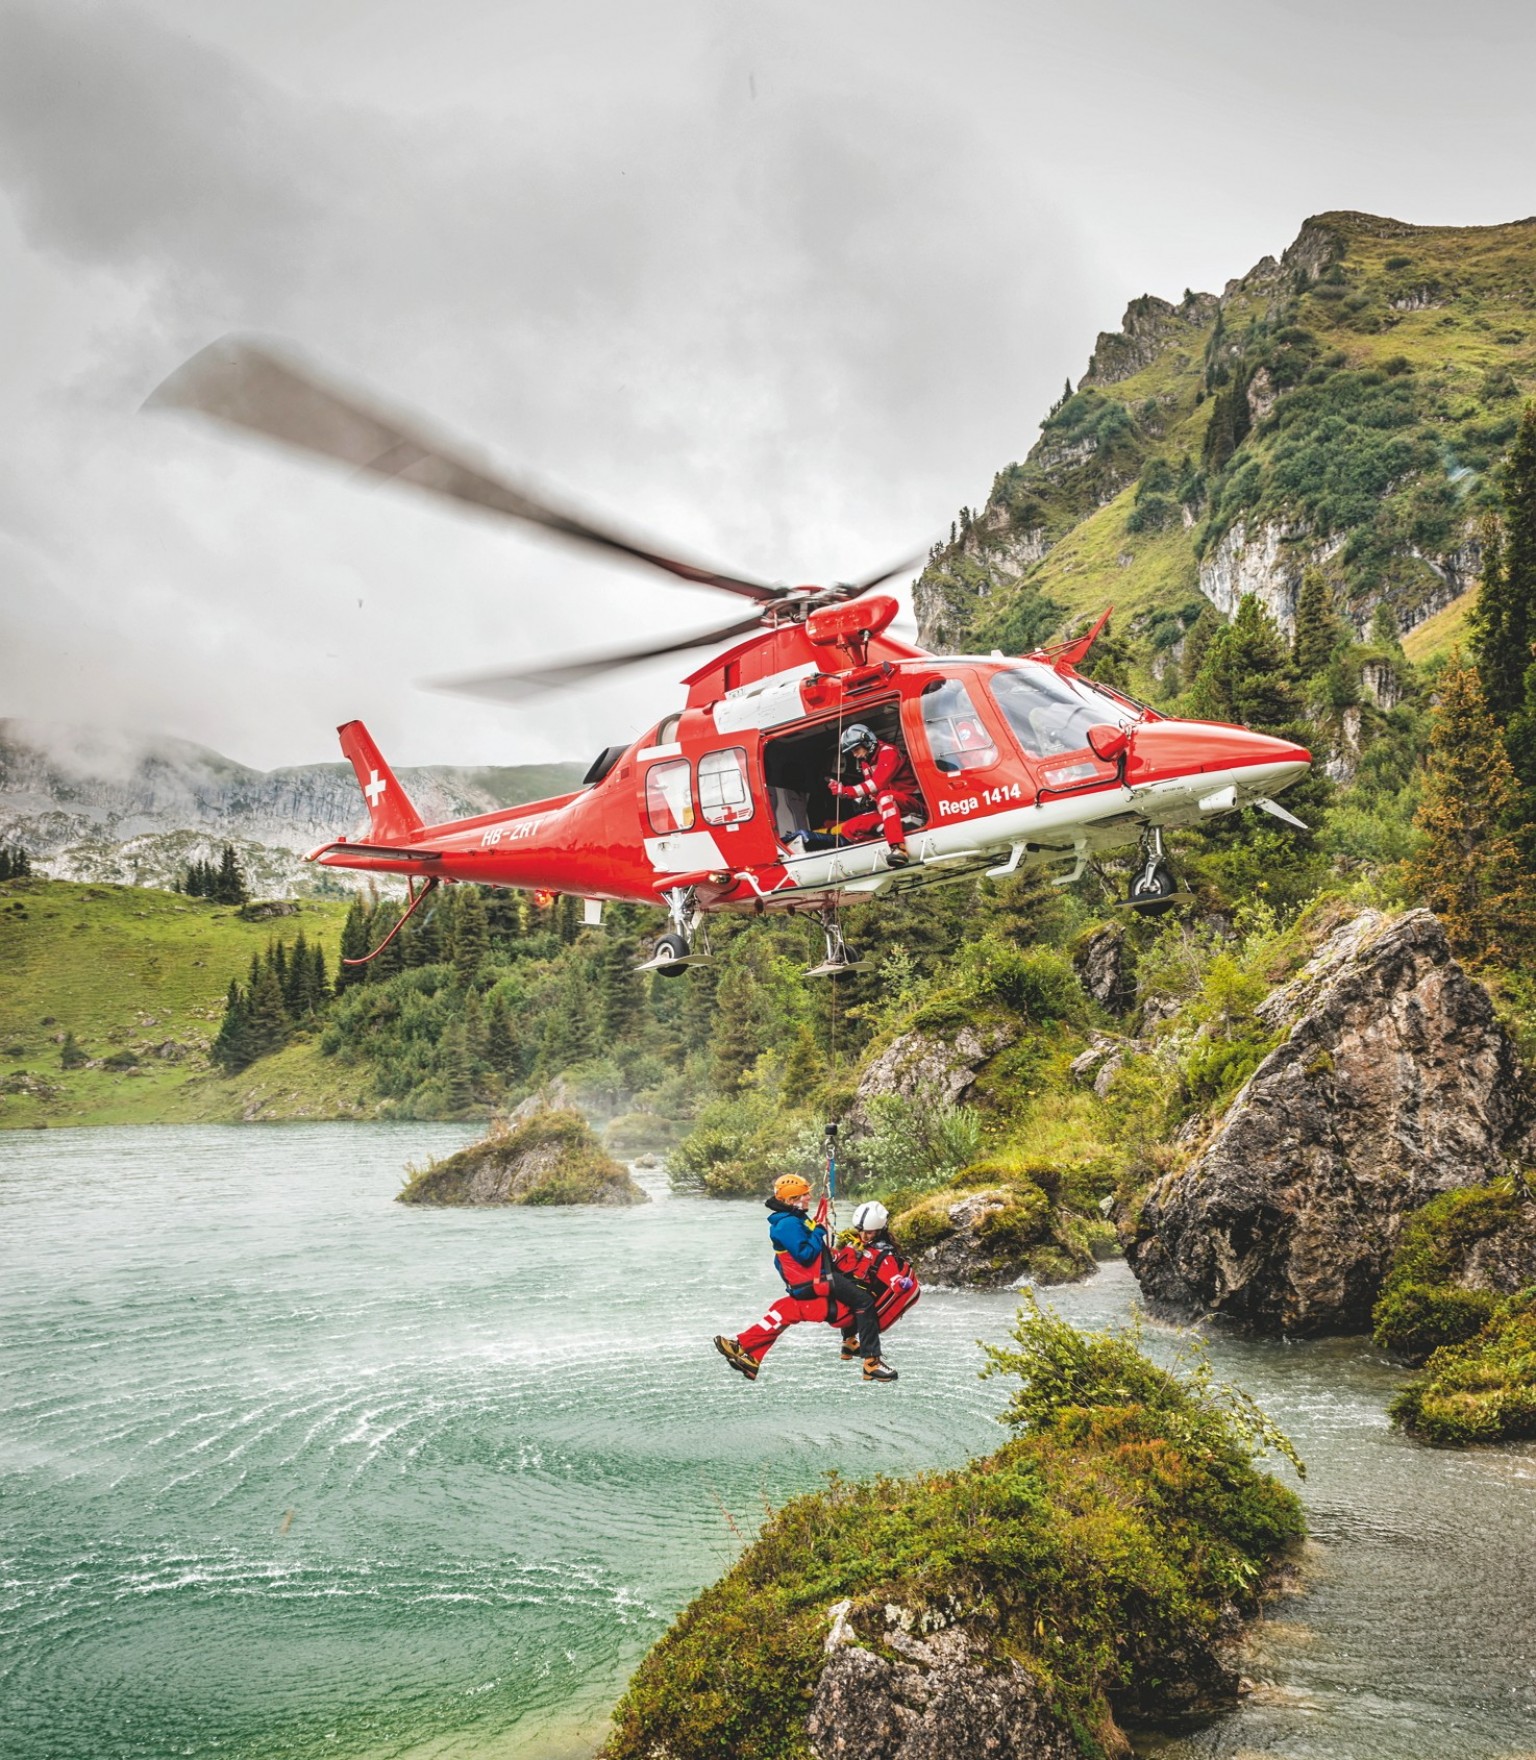 A Rega Challenger helicopter rescue in the Alps